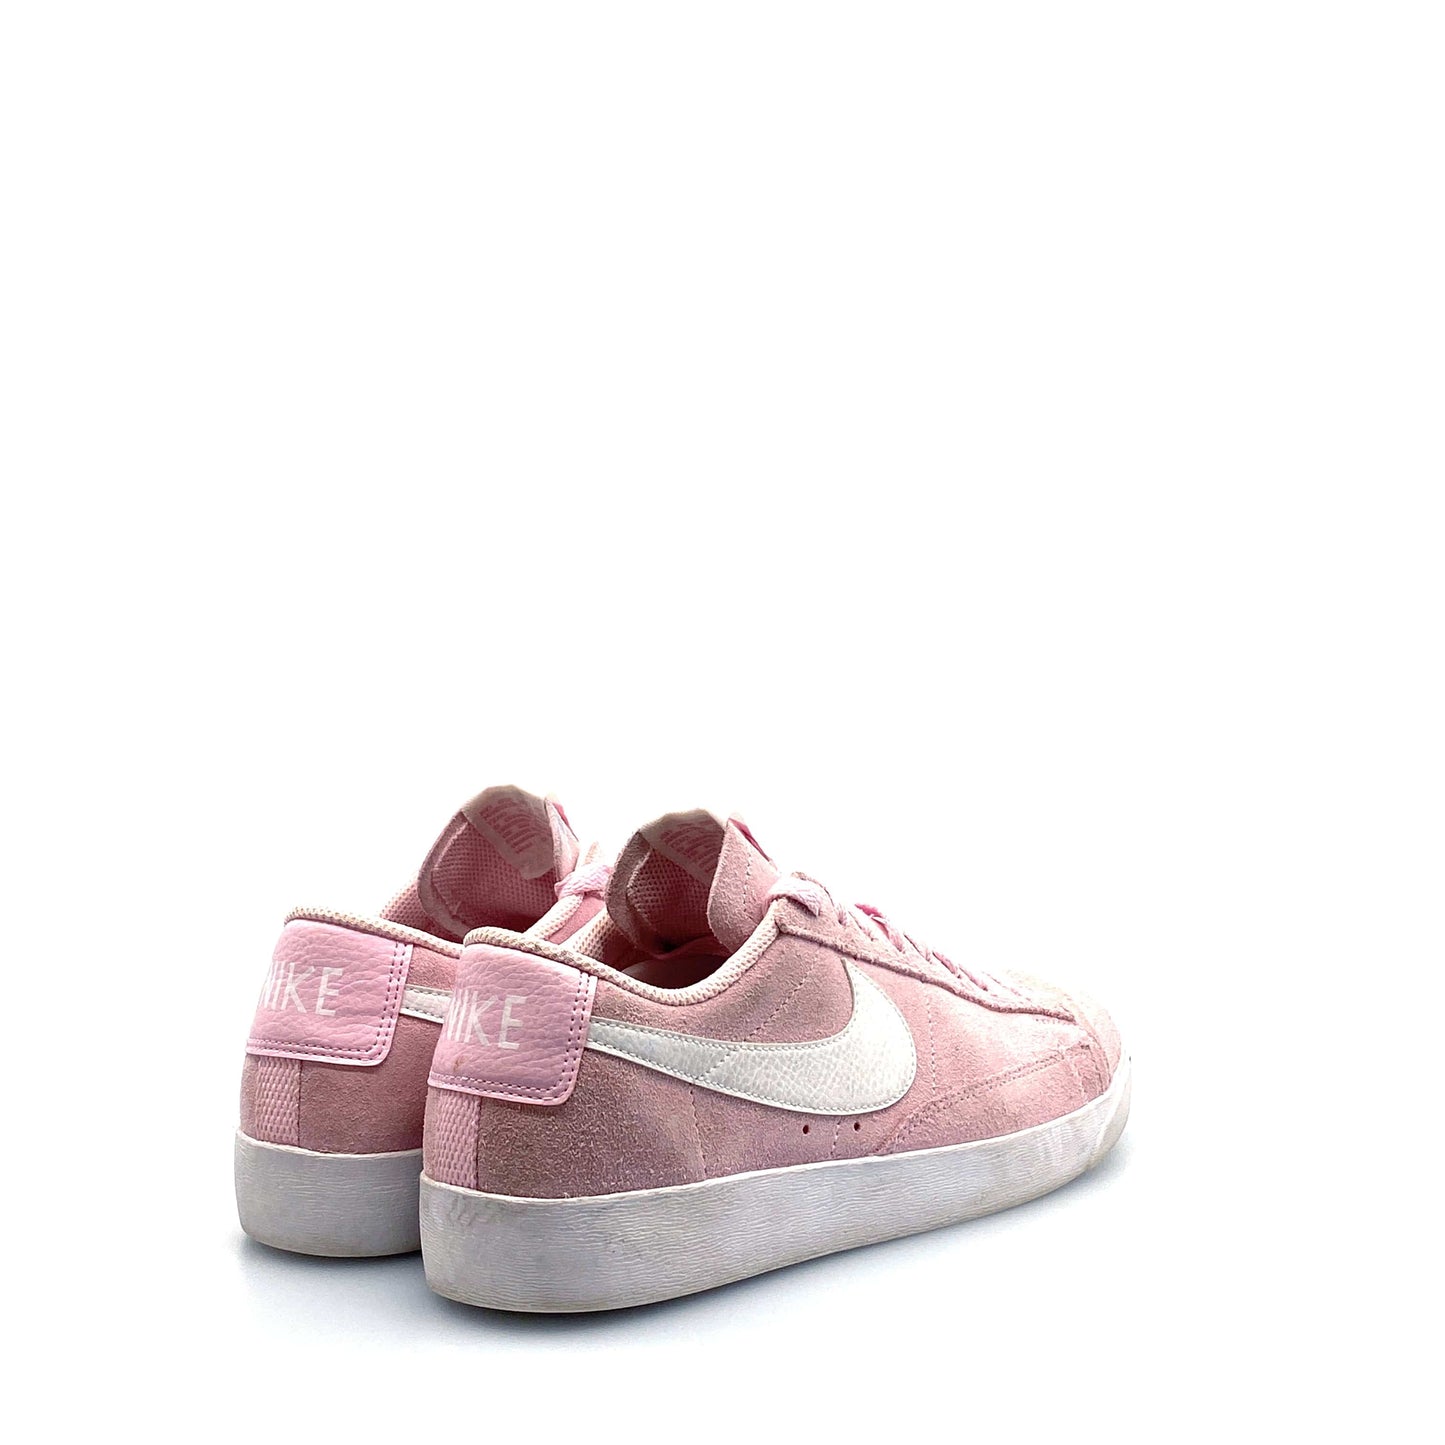 Nike Womens Blazer Low Size 10 Pink Suede Sneakers Shoes